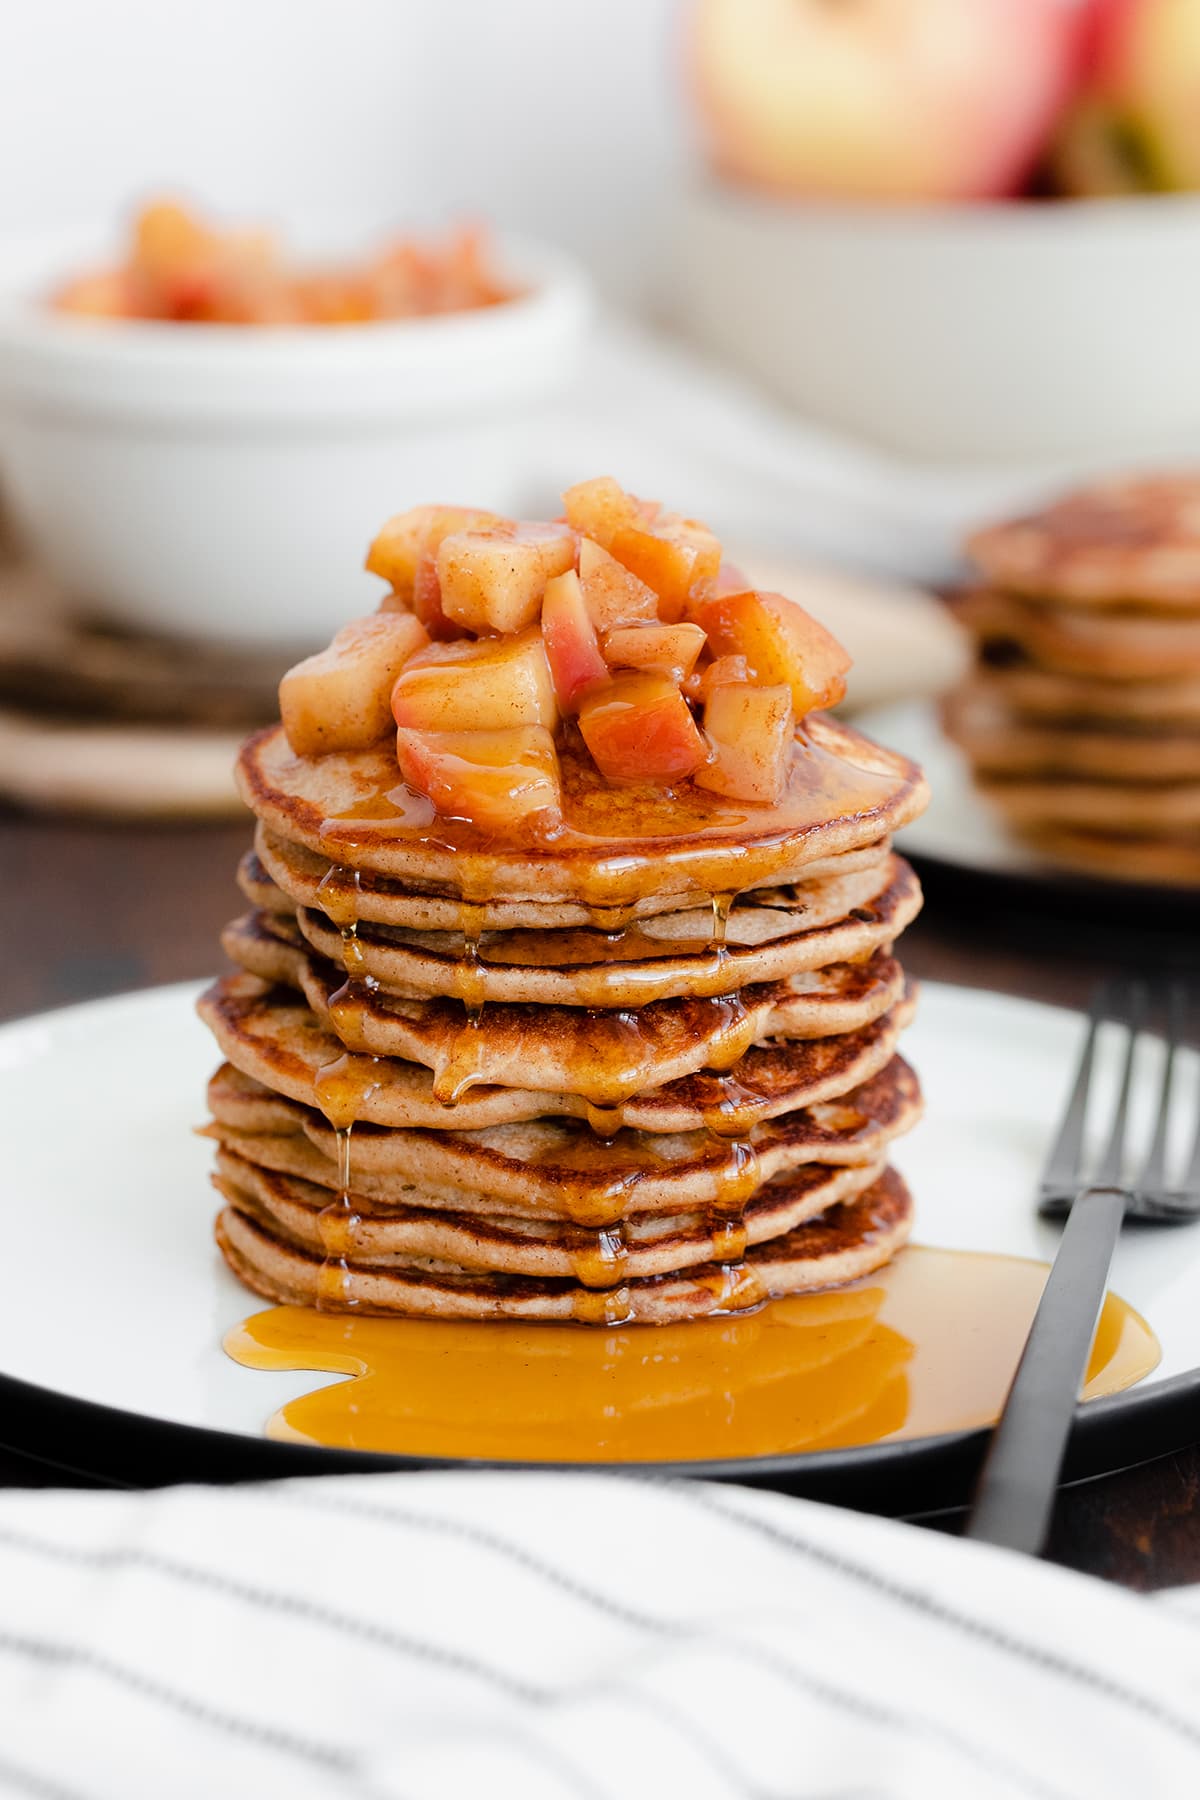 A straight on photo of Chocolate Chip Apple Cider Pancakes with Stewed Apples on a white plate and dark wooden background.